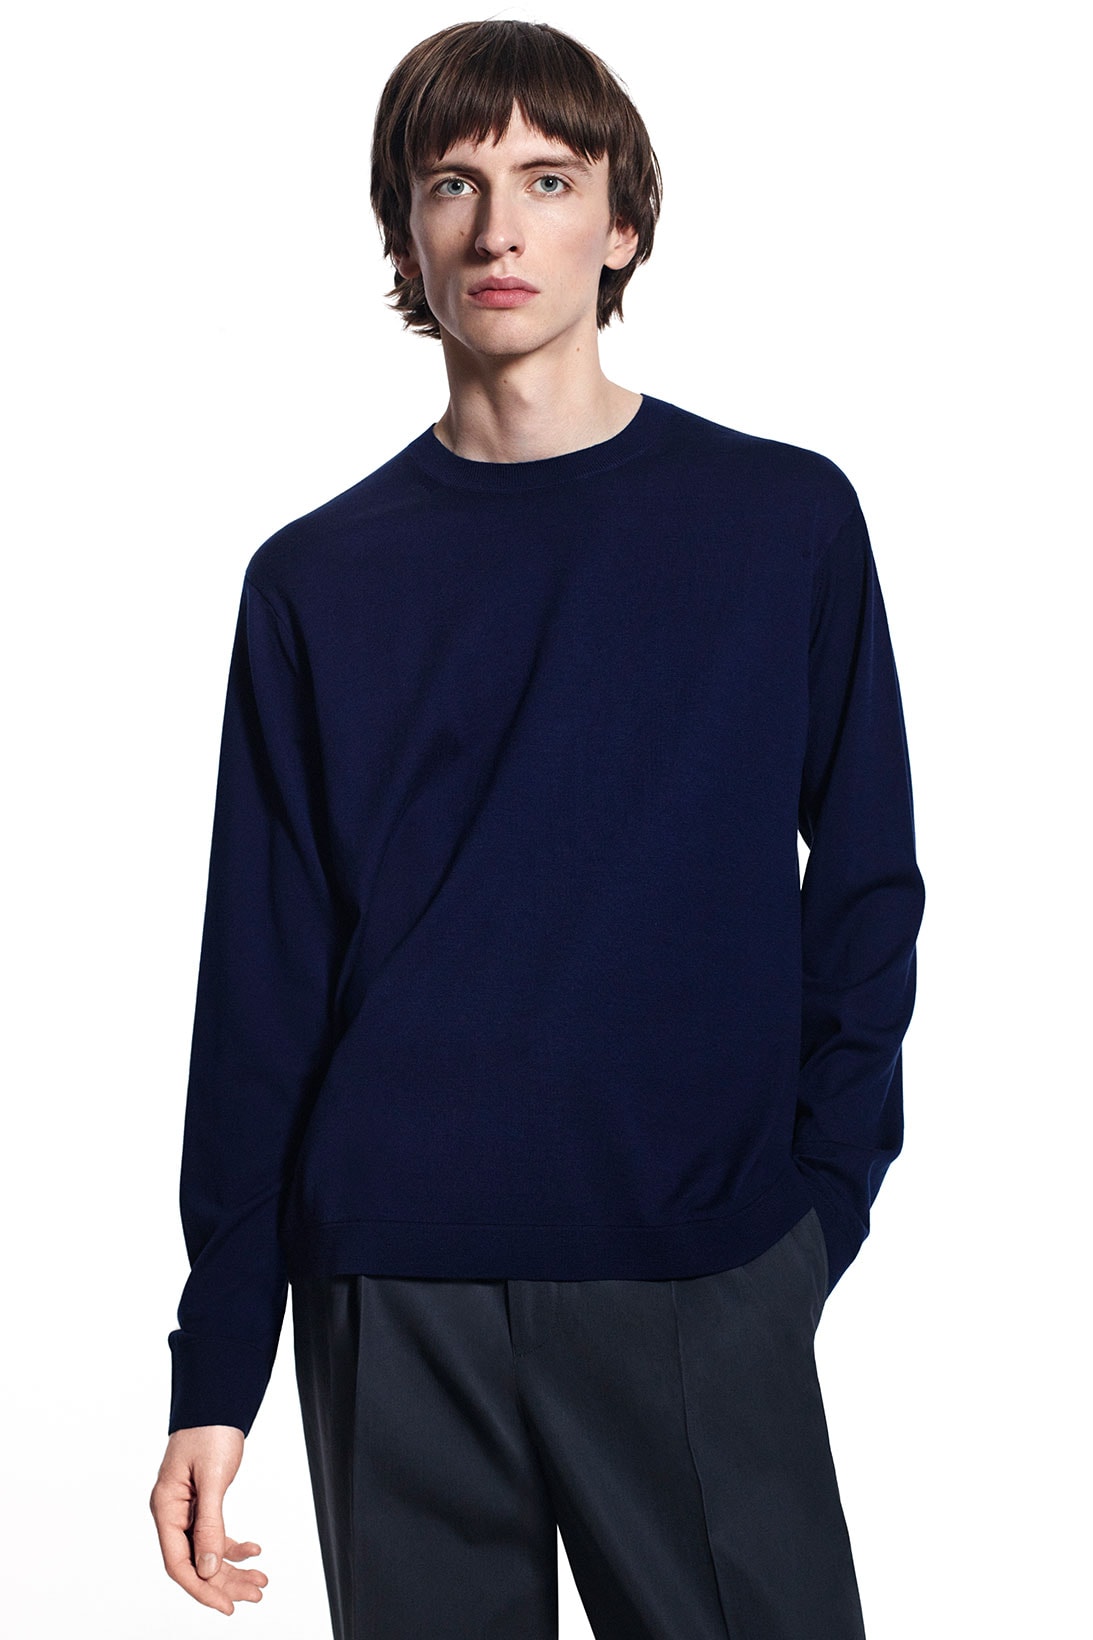 jil sander uniqlo plus j spring summer ss21 collaboration collection knit sweater